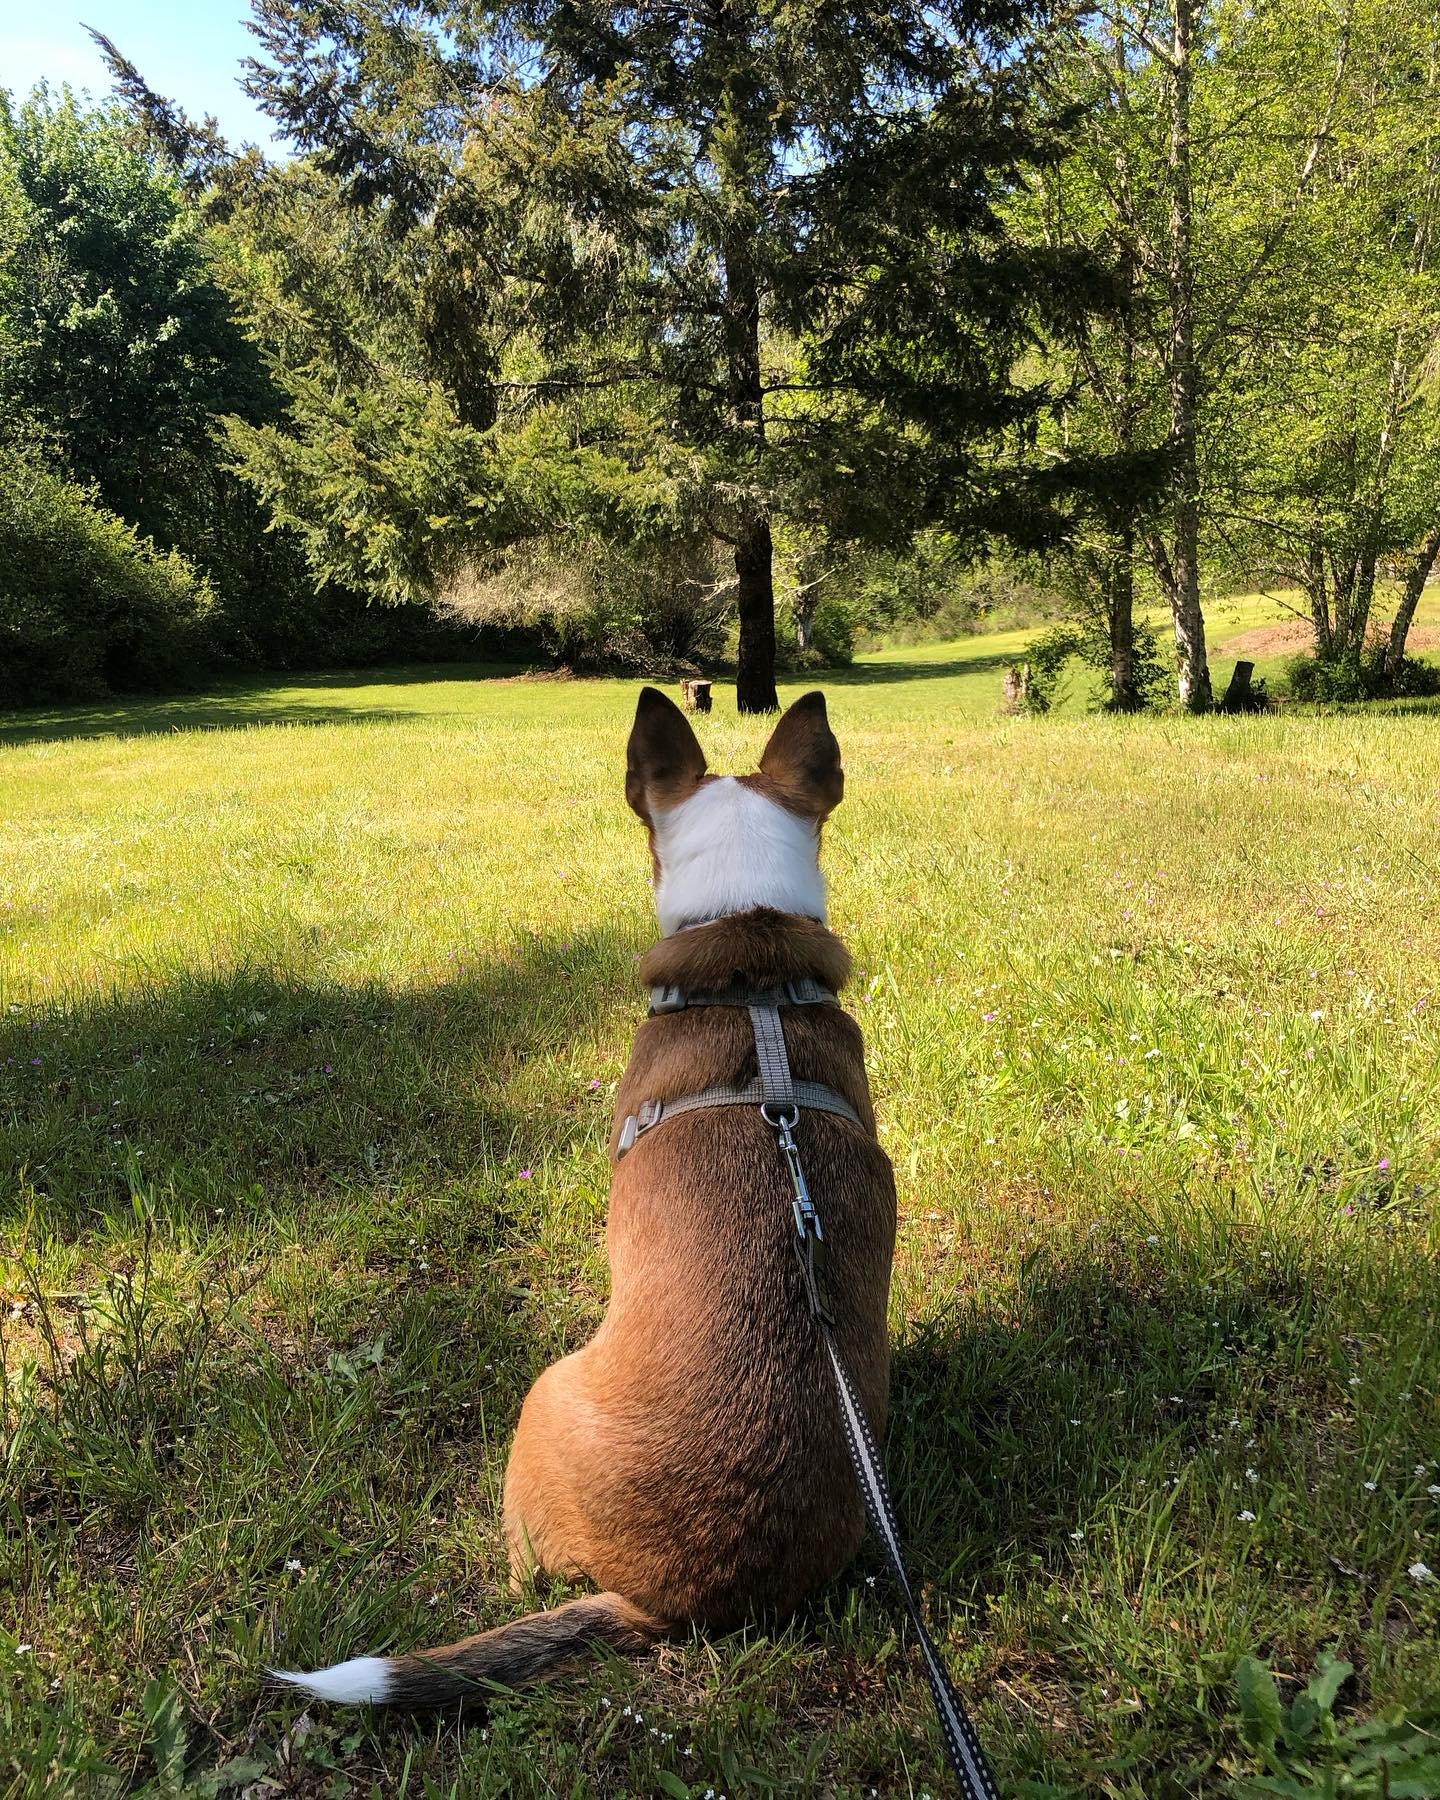 Life is often best seen through two ears. 😌💛🐾

This was our afternoon. Not planned but needed.

#lifebetweentheears #lifewithpuppo #getoutside #adventures #myadventuress #queenaurelia #chihuahua #chihuahualove #parksareawesome #uplifting #love